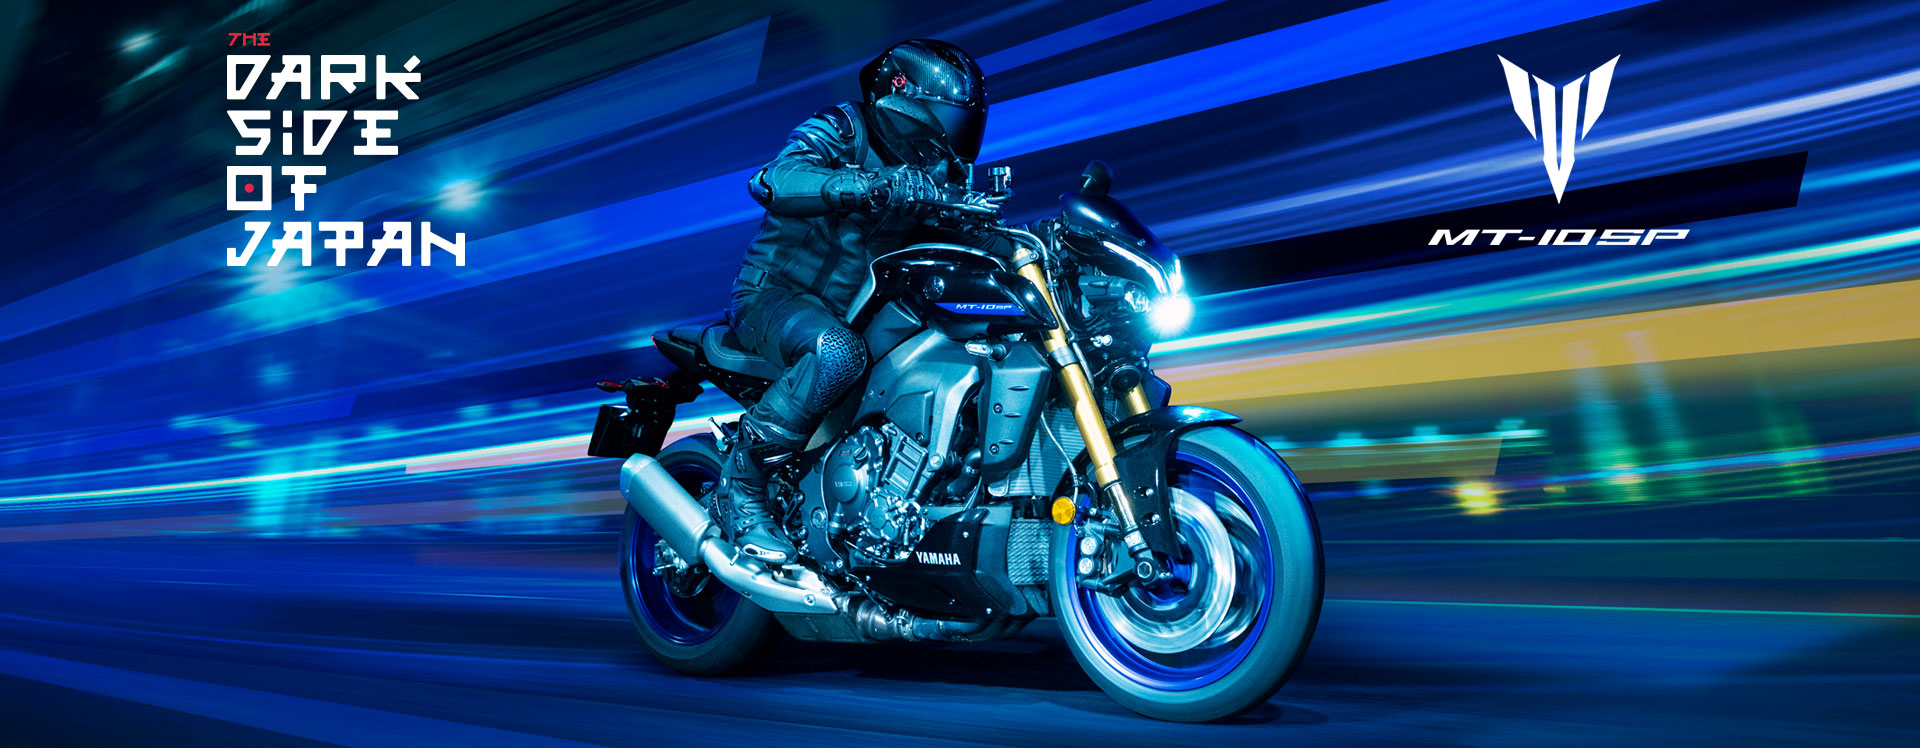 the Monster advert from Yamaha's website showing a rider on a monster in front of a blue slow-exposure background